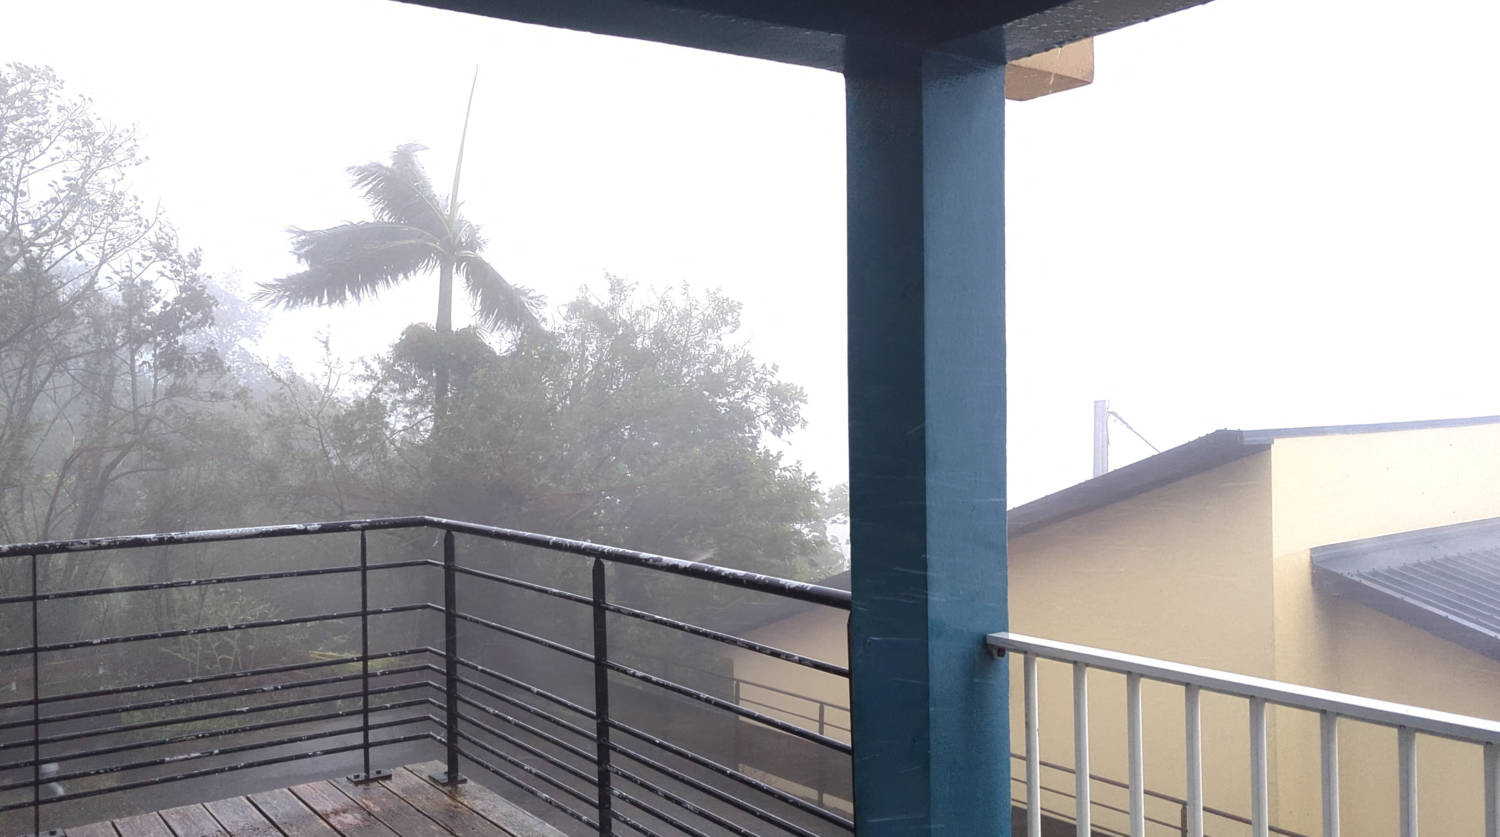 Rain Splashes Inside A Balcony Amid Strong Winds Caused By Cyclone Belal, In Reunion Island